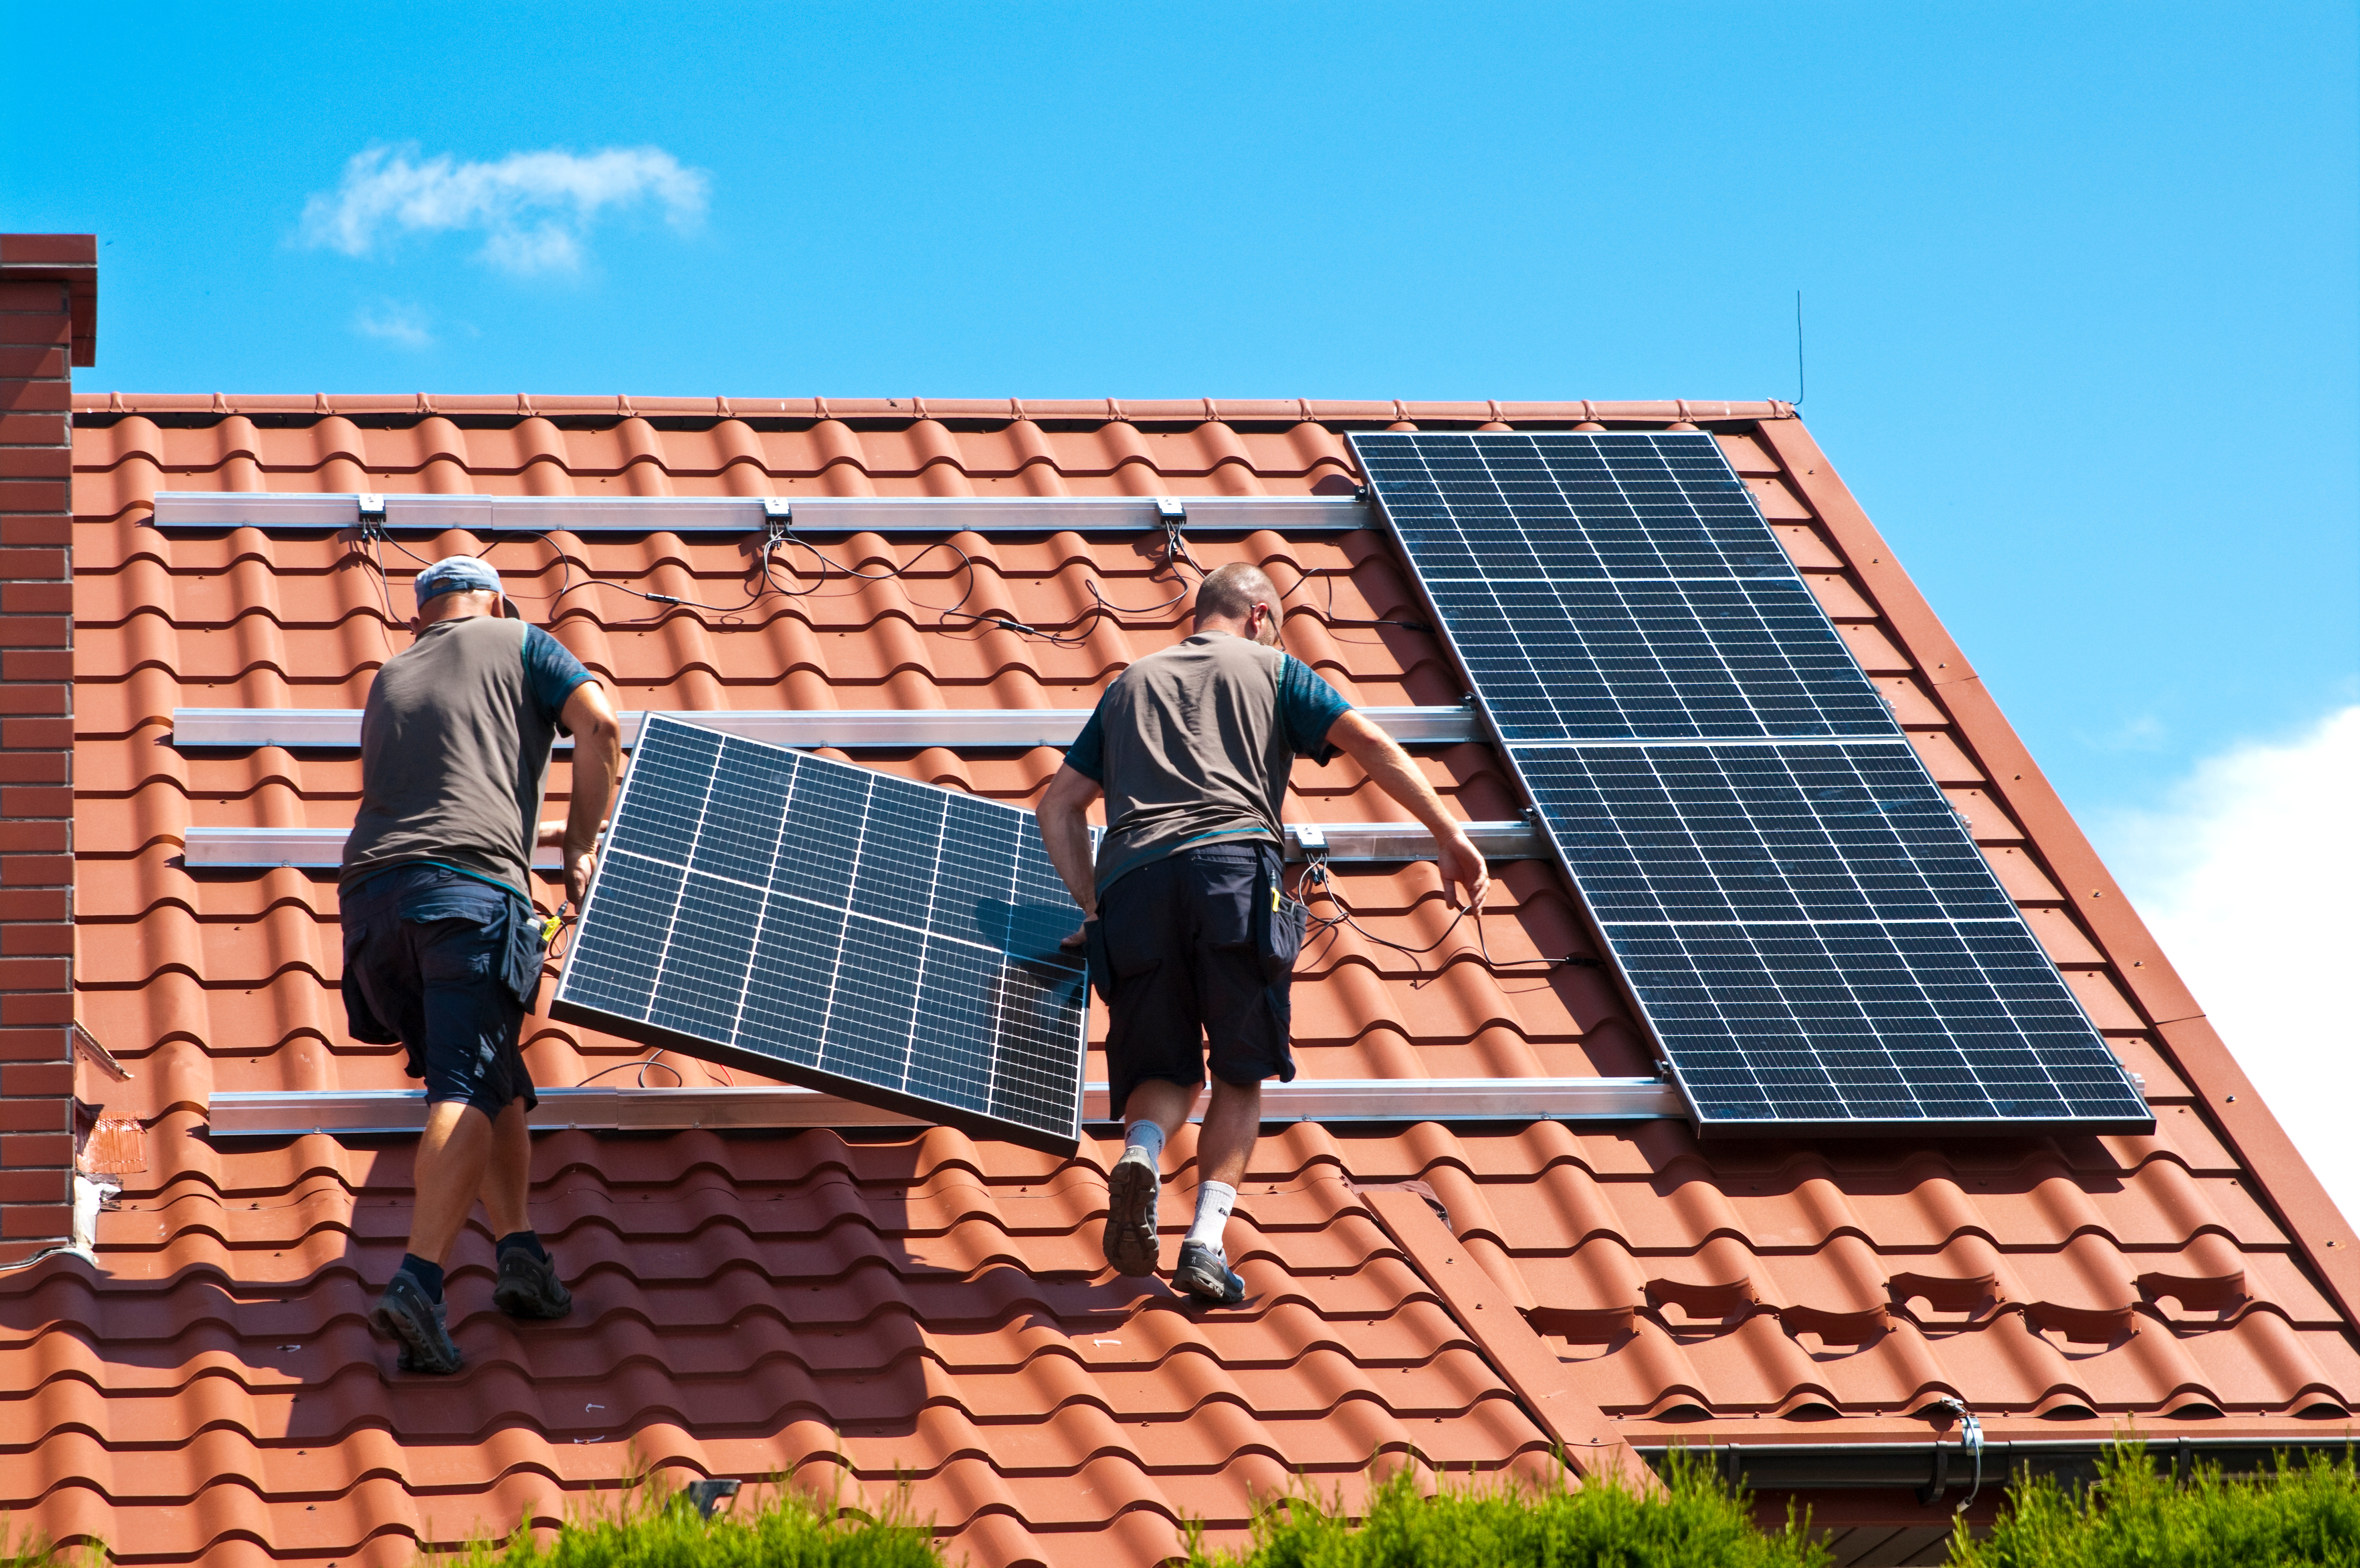 Read: FAQs About Solar Panels for Homeowners